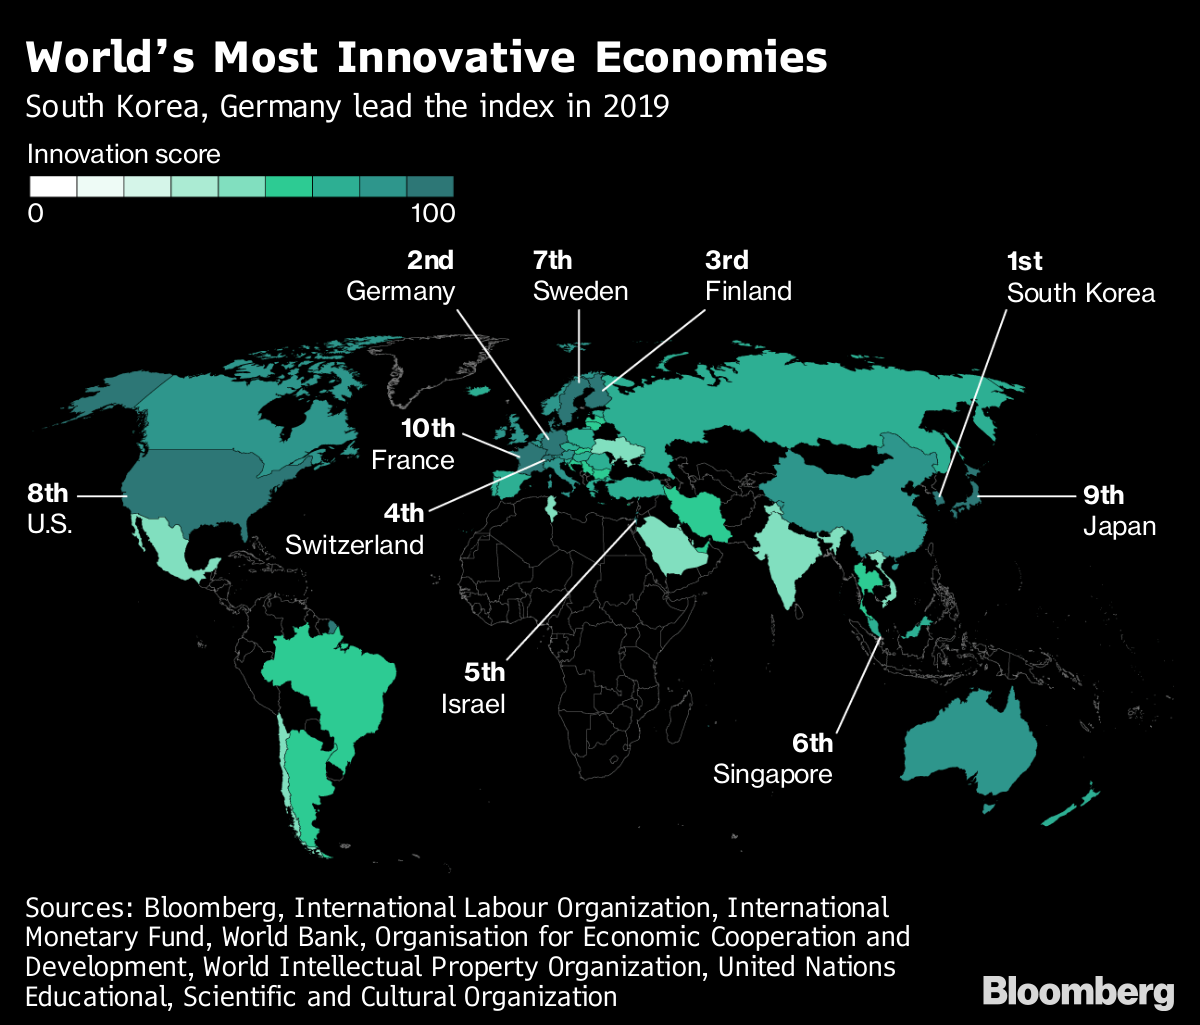 These are the world's most innovative countries